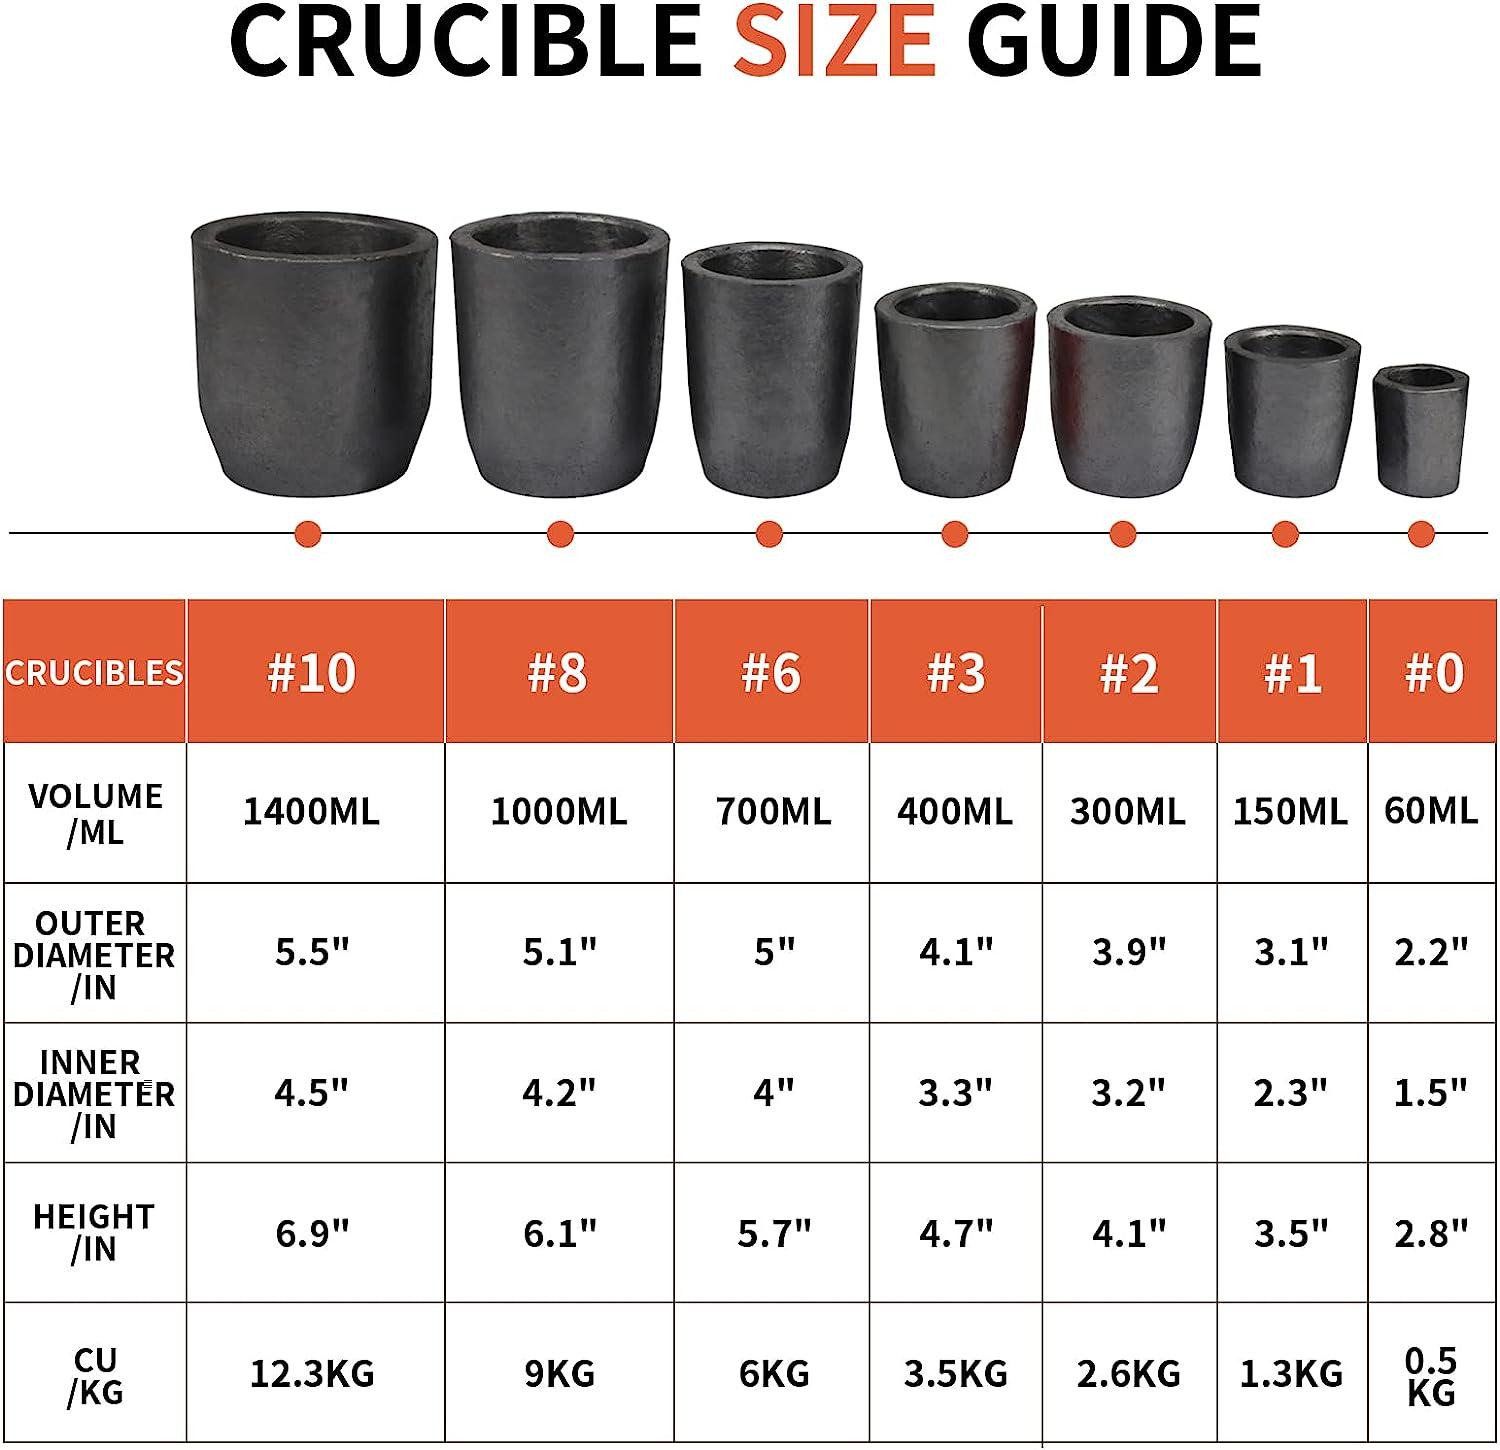 Three different sizes of graphite crucibles were used to